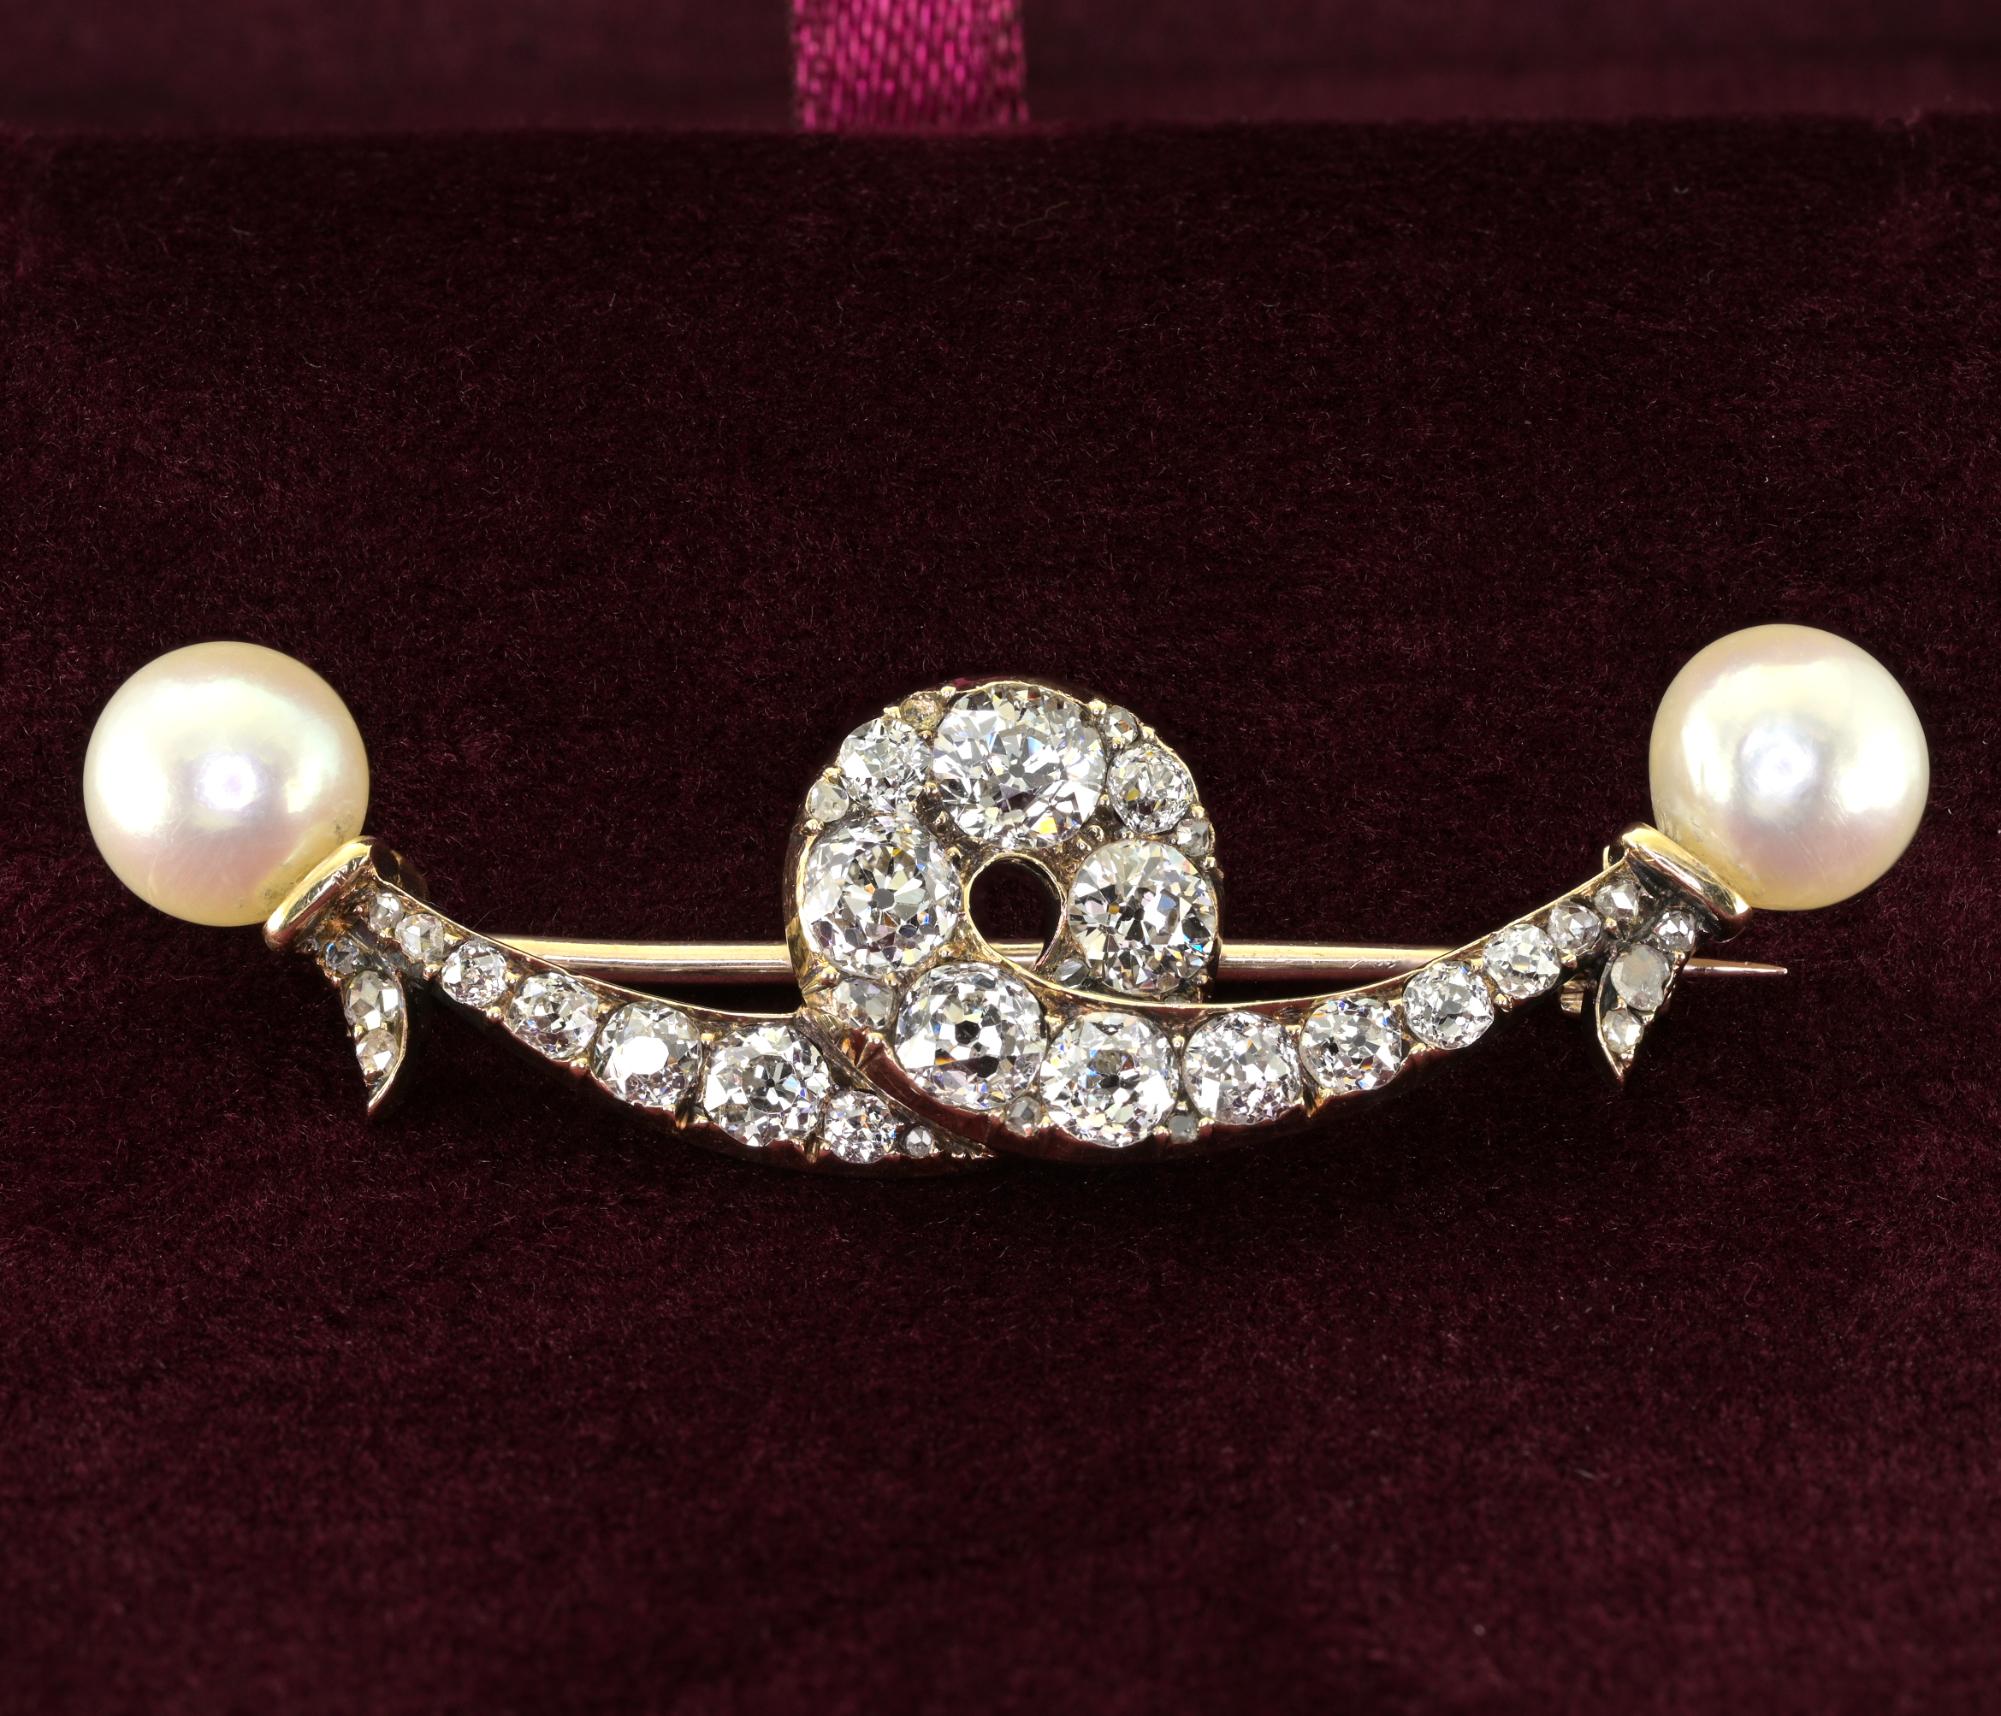 This beautiful Victorian Brooch is 1890 ca
Exquisitely hand crafted during the time of solid 18 KT gold
Timeless and elegant bow design loaded by antique cut Diamonds and natural pearls
Diamonds are old mine cut and littler rose cut to complement